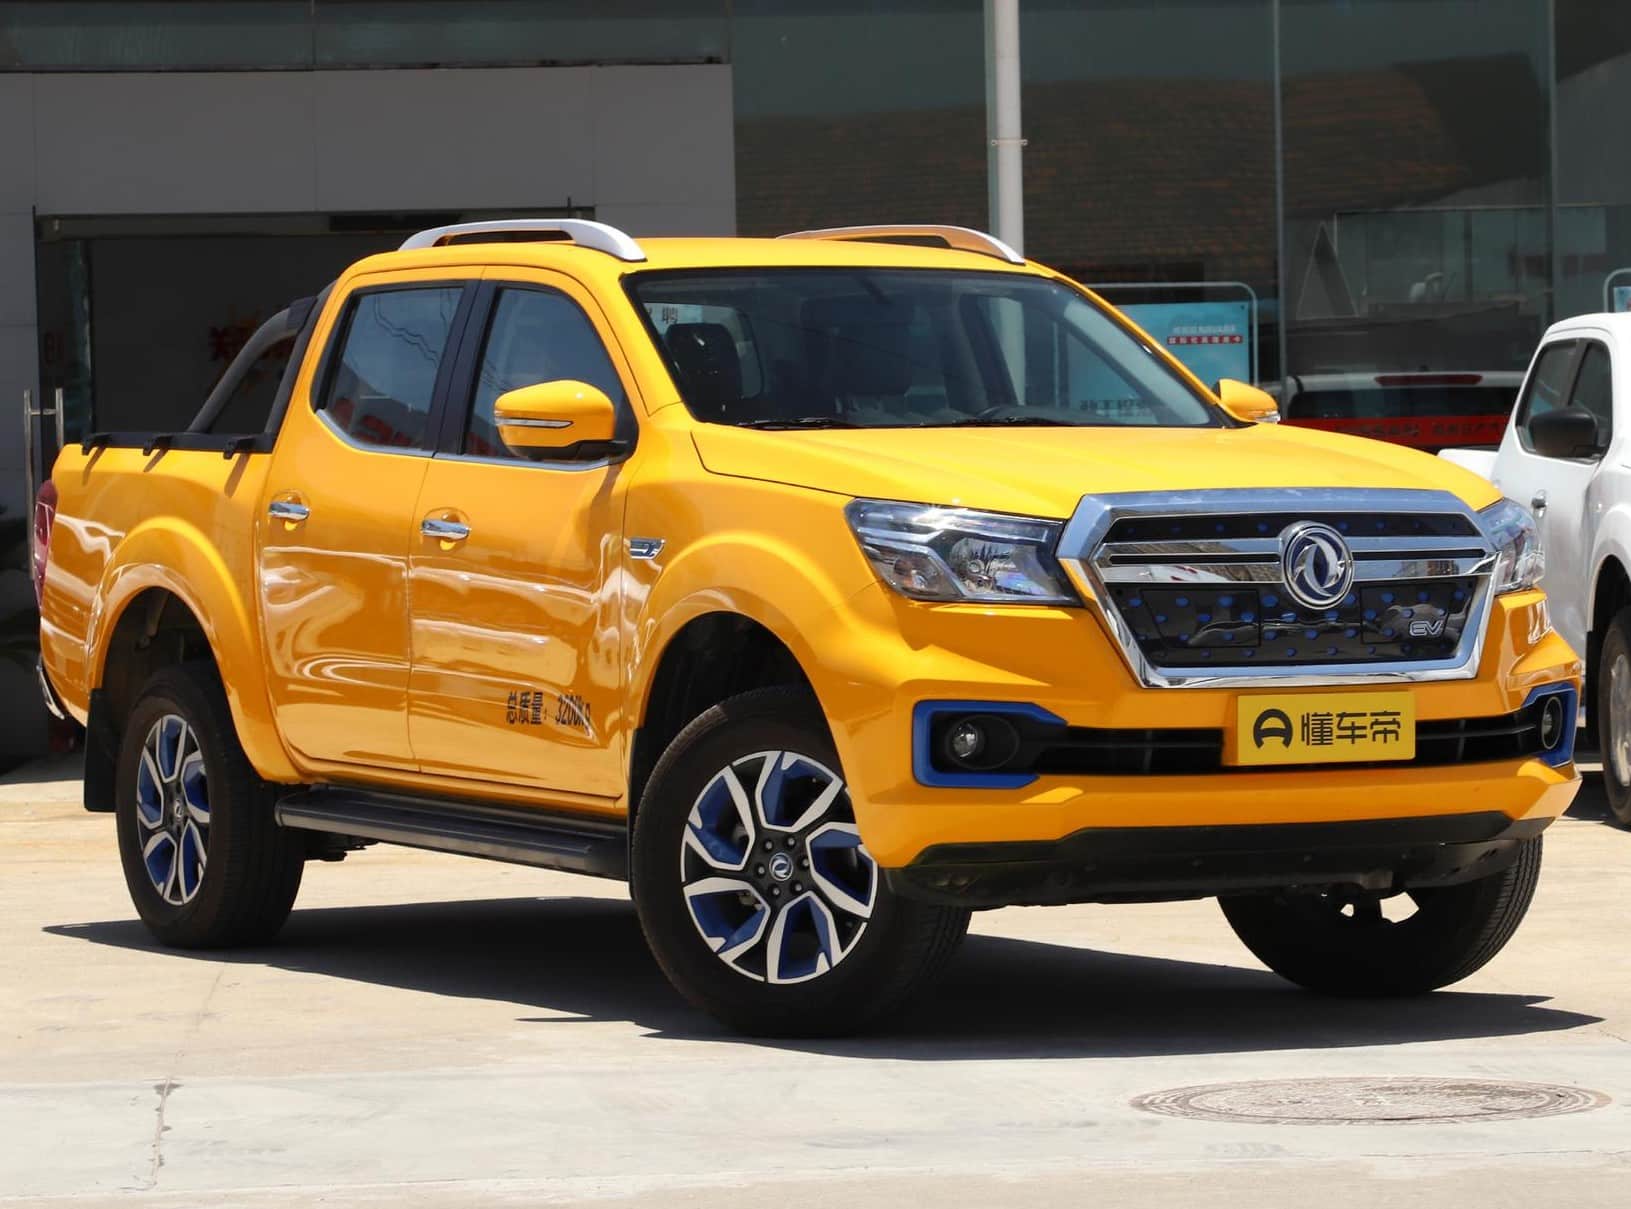 Dongfeng Rich 6 EV Pickup Truck Launched On The Chinese Car Market For $40,000